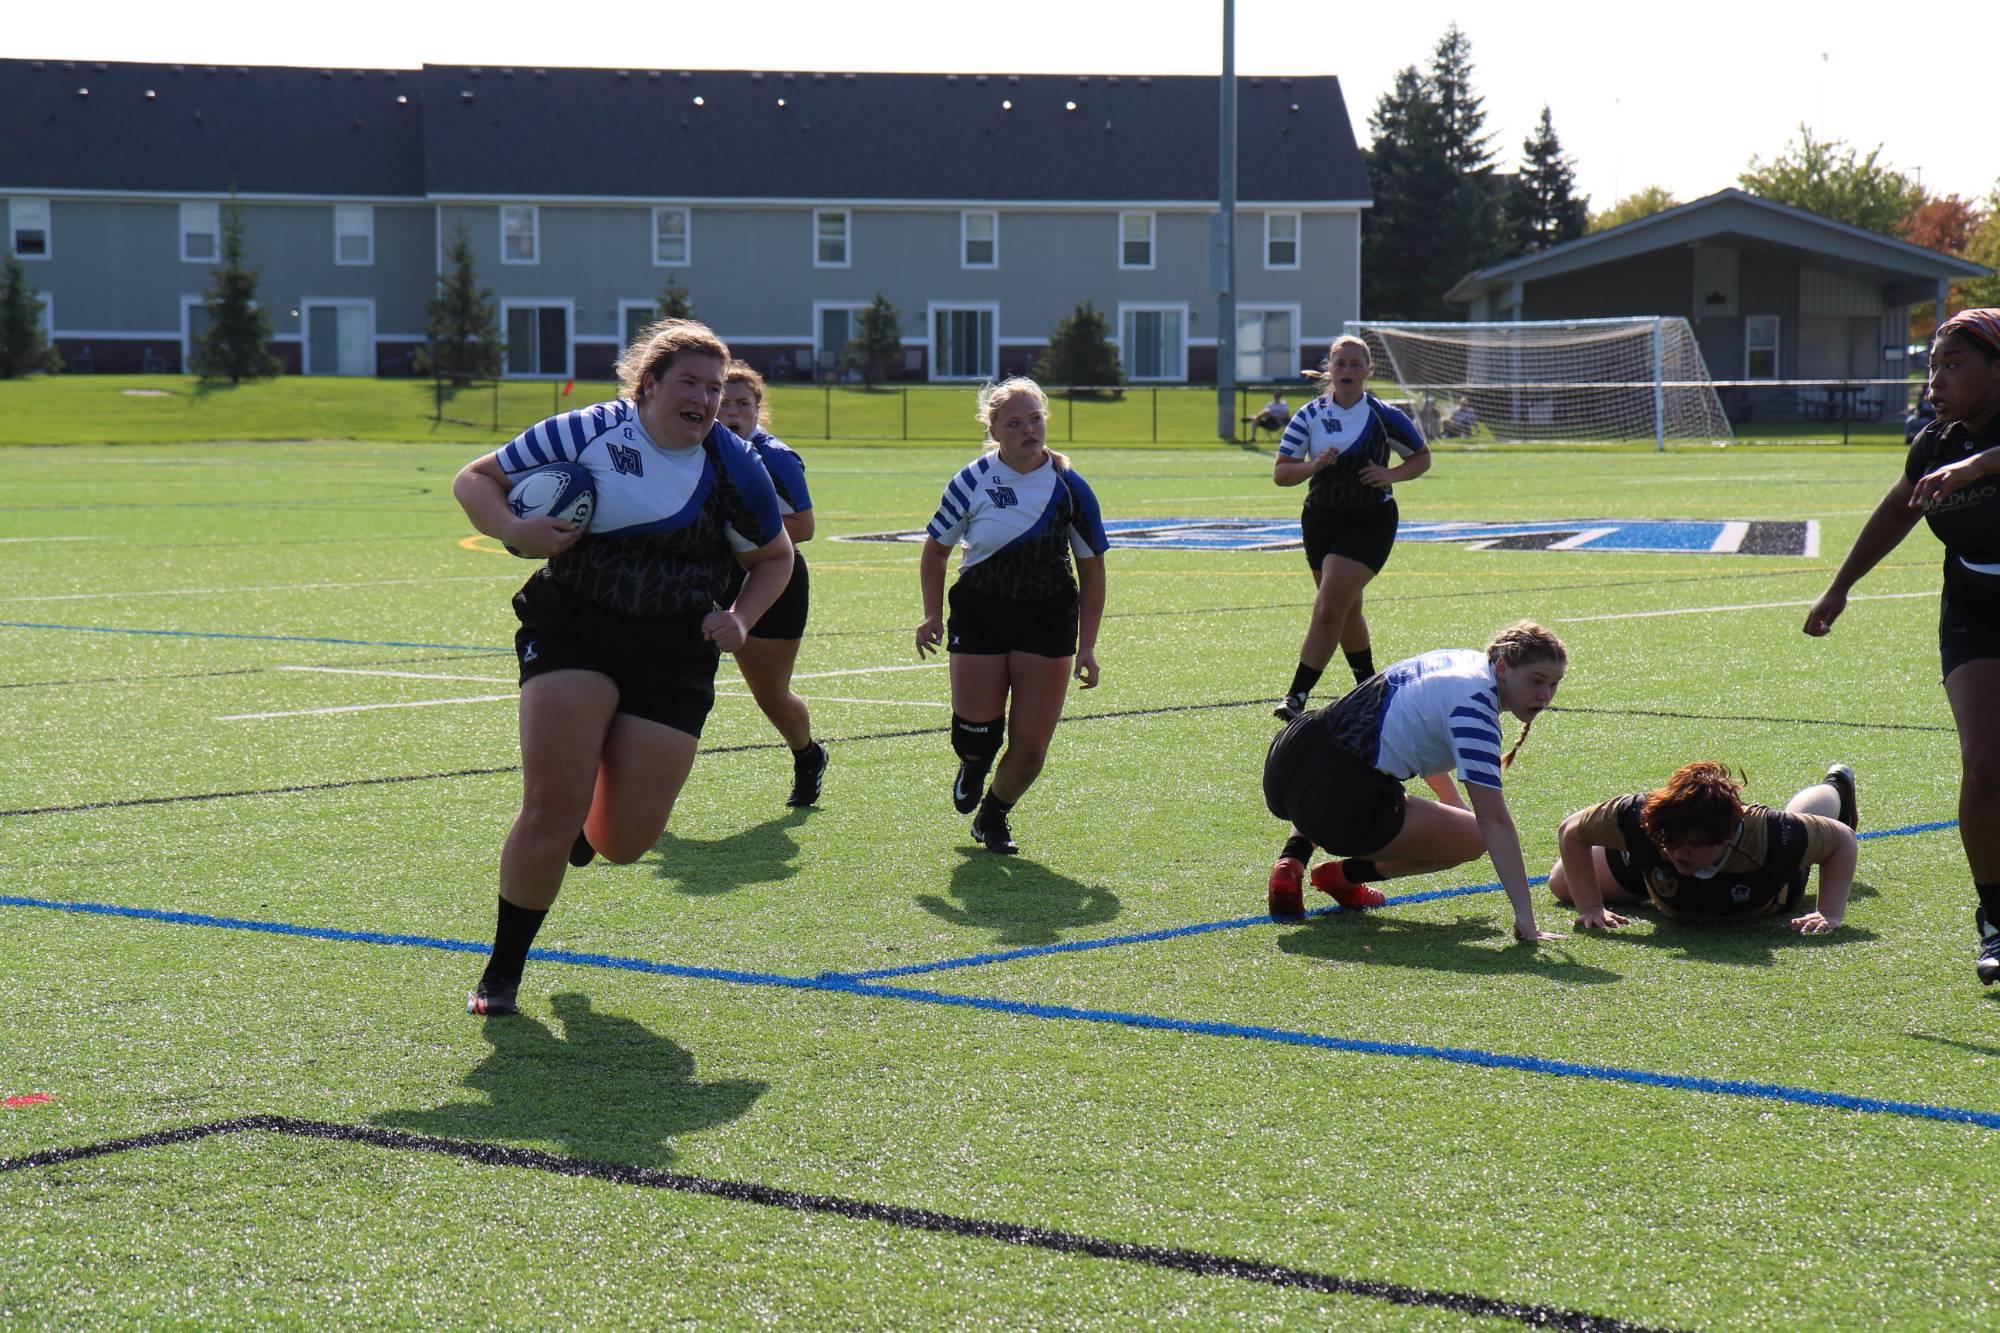 women's rugby game on field 1